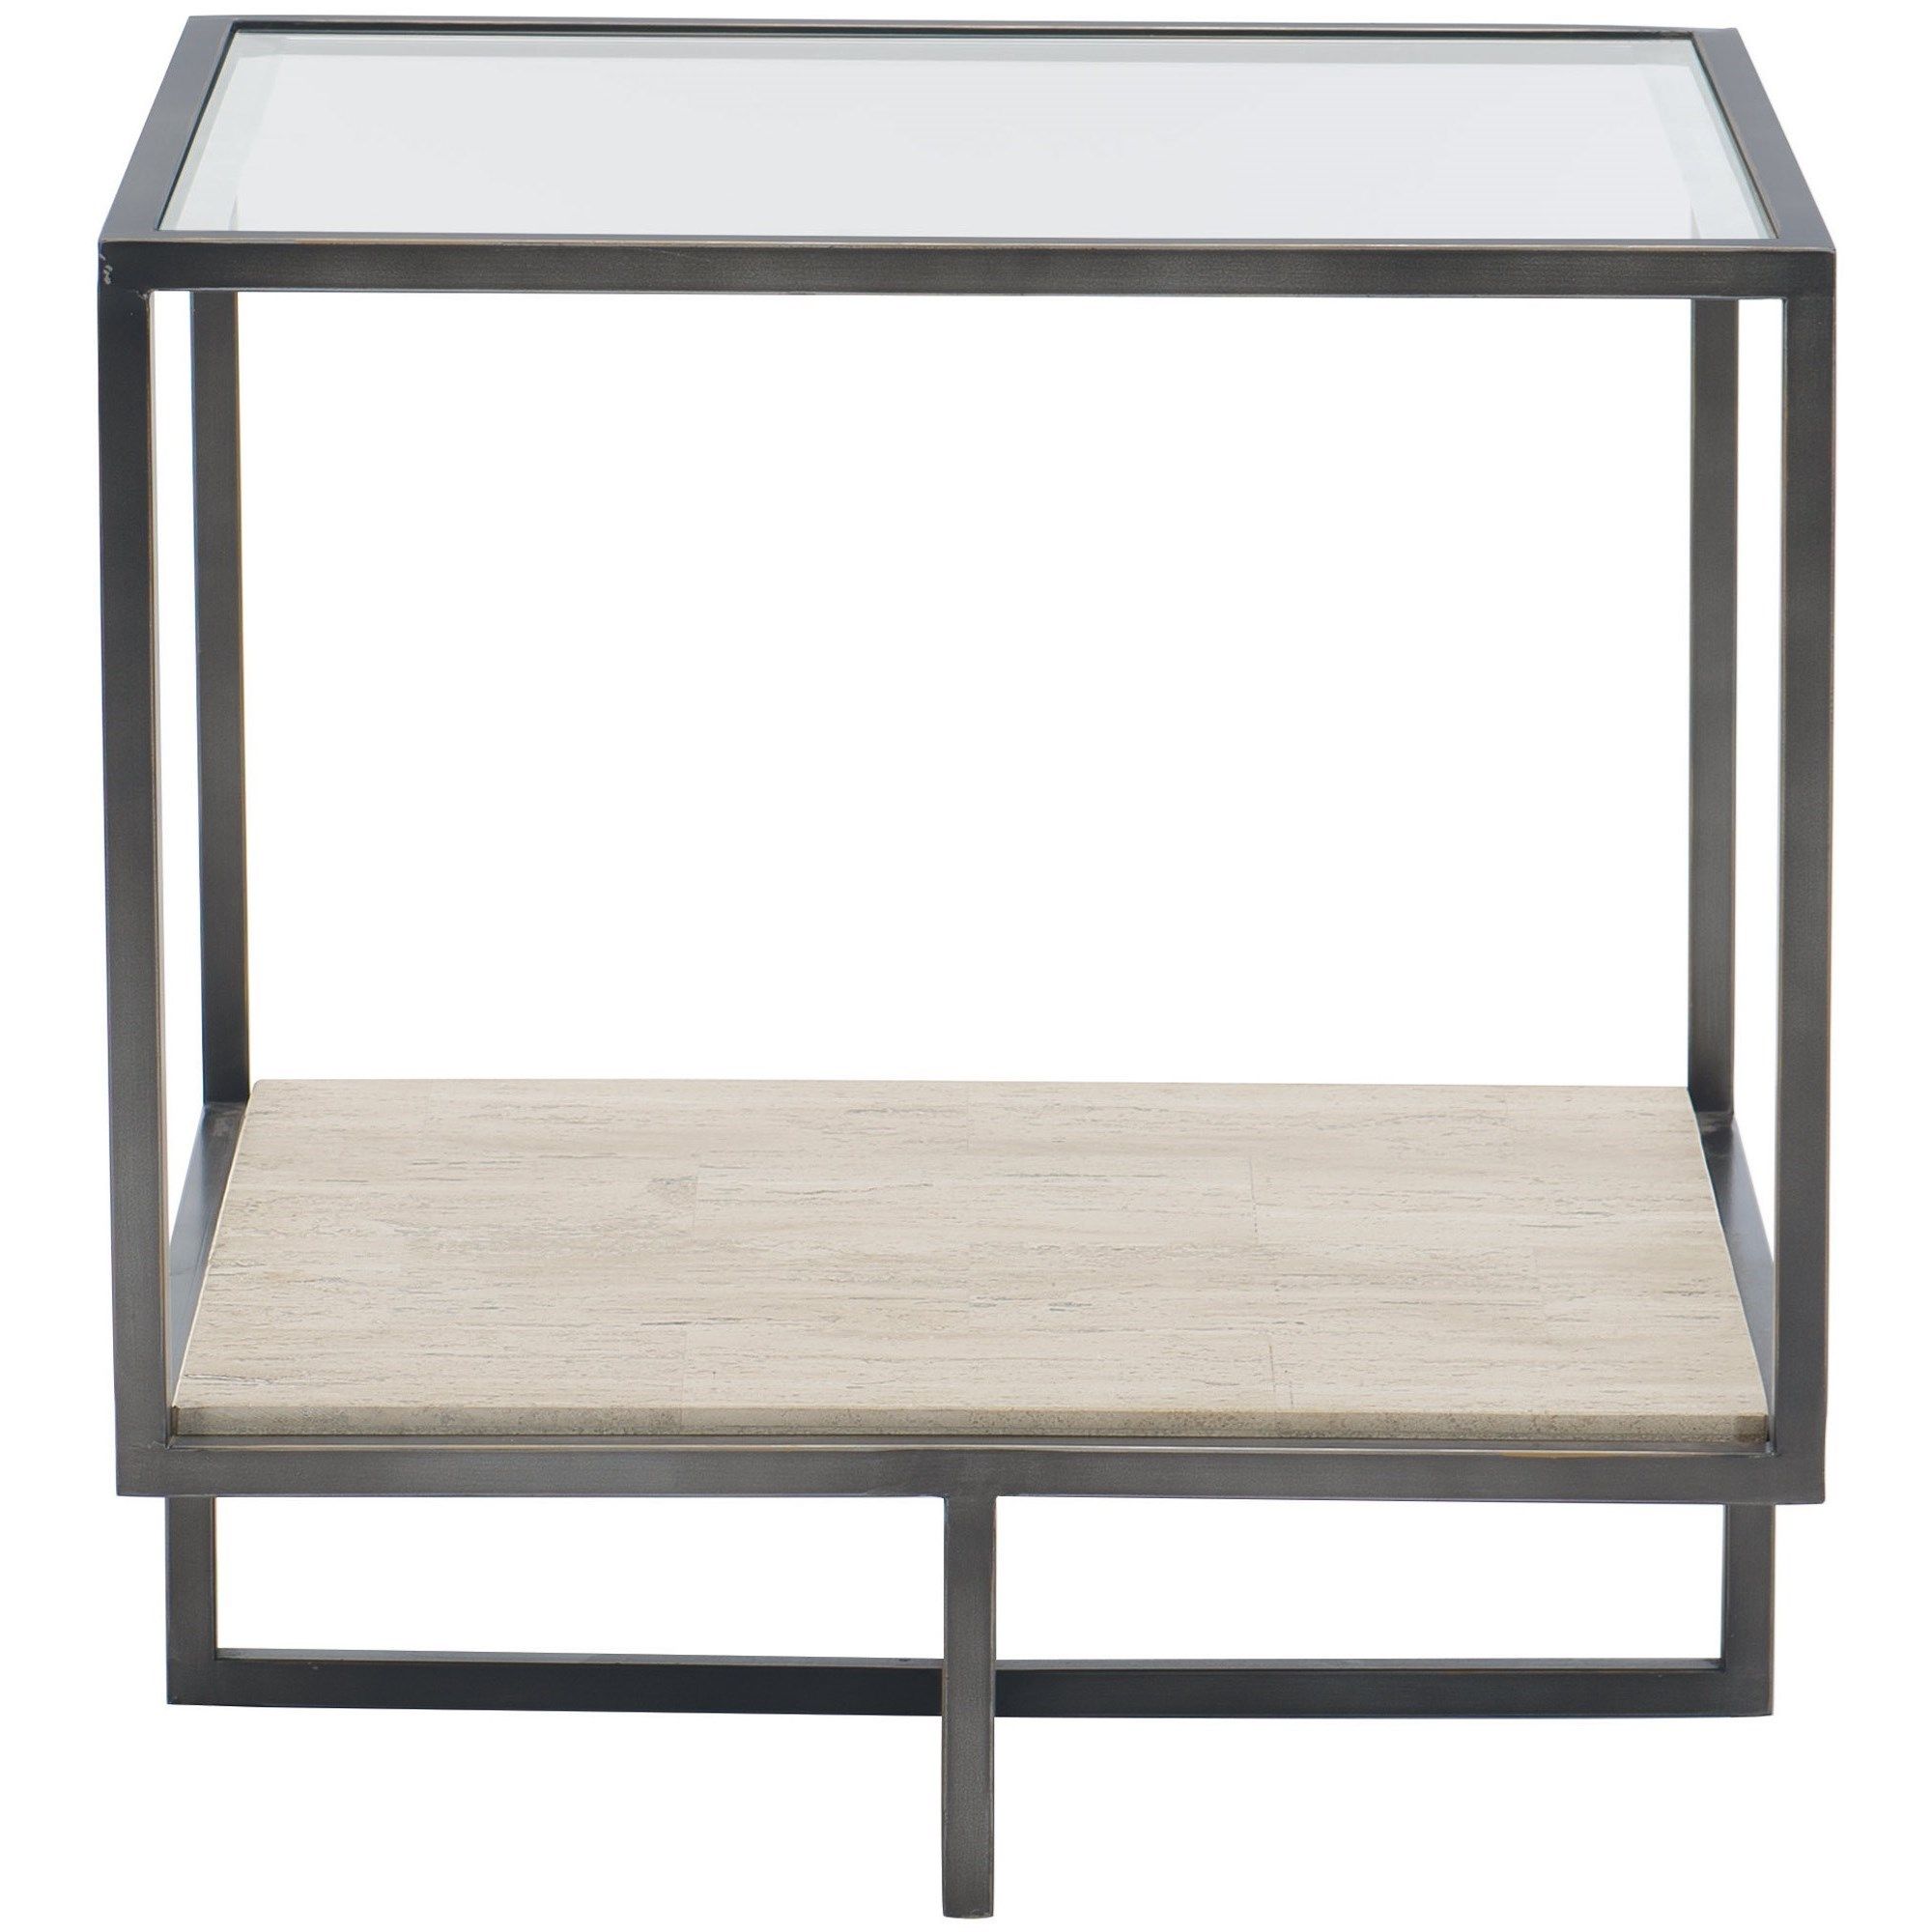 Bernhardt Harlow 514 121 Contemporary Metal Square End Table | Baer's In Square Console Tables (Gallery 19 of 20)